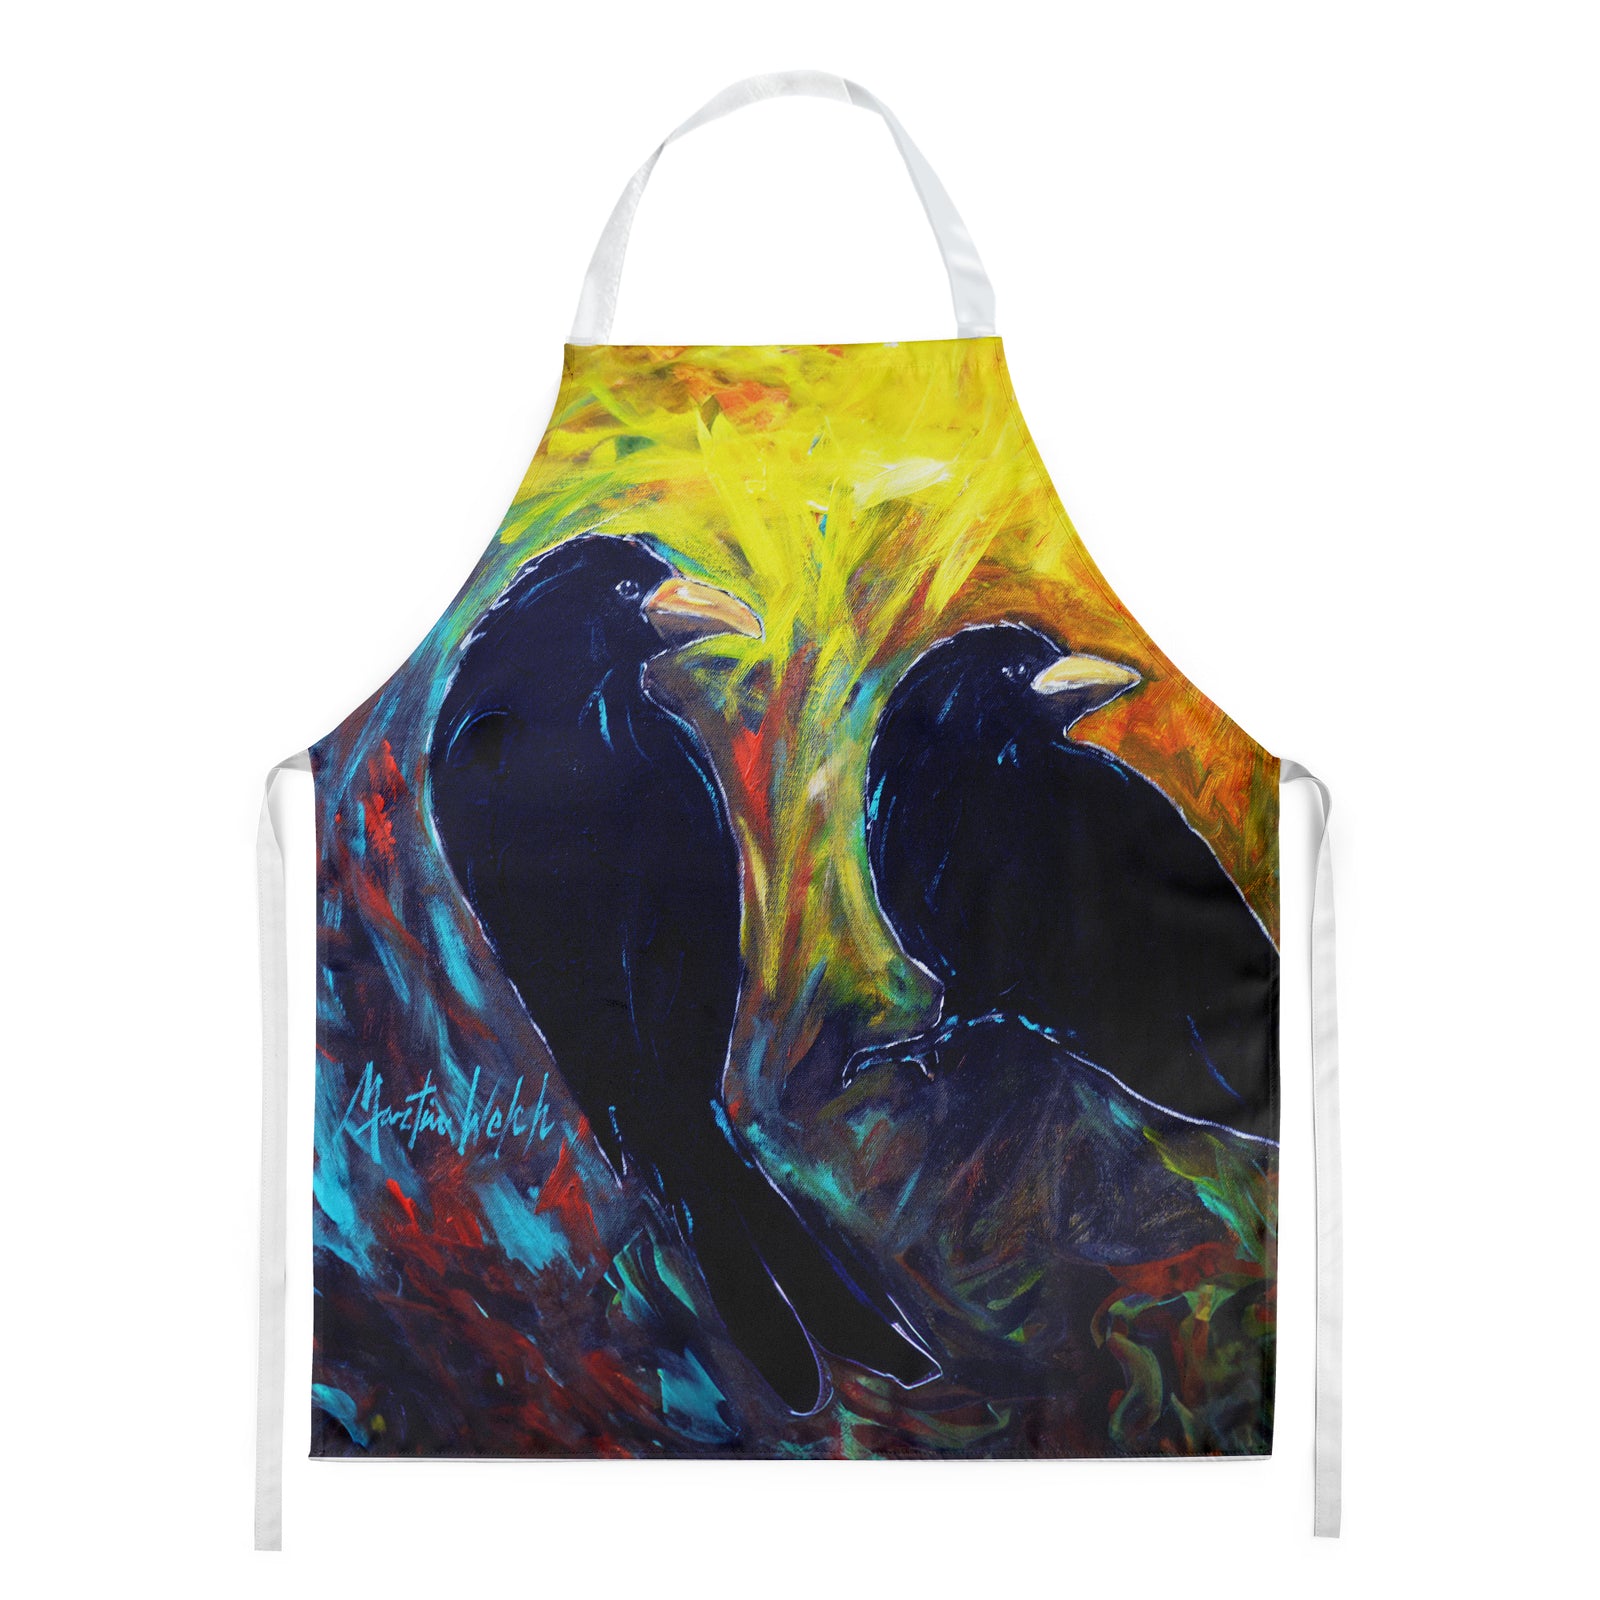 Buy this What Was That Black Crows Apron